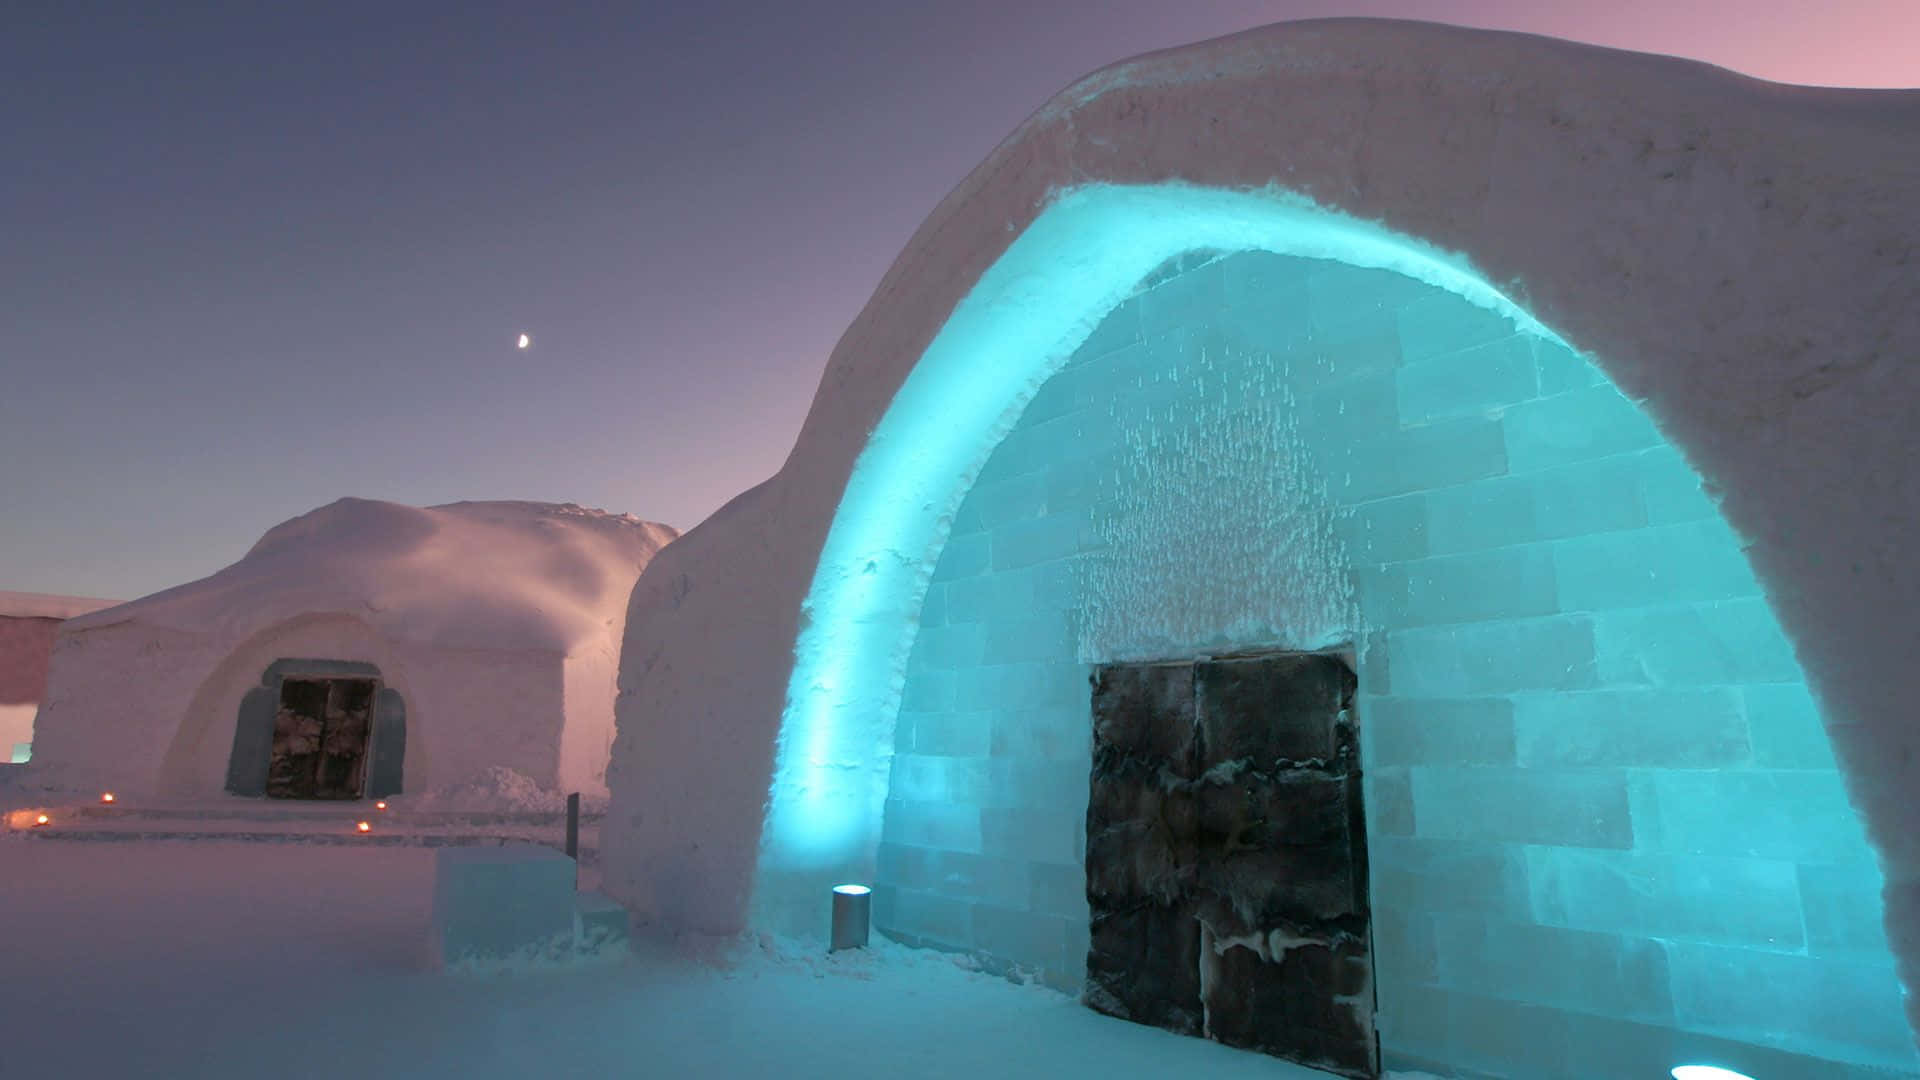 Stunning Ice Hotel Room with a Cozy Snowy Interior Wallpaper